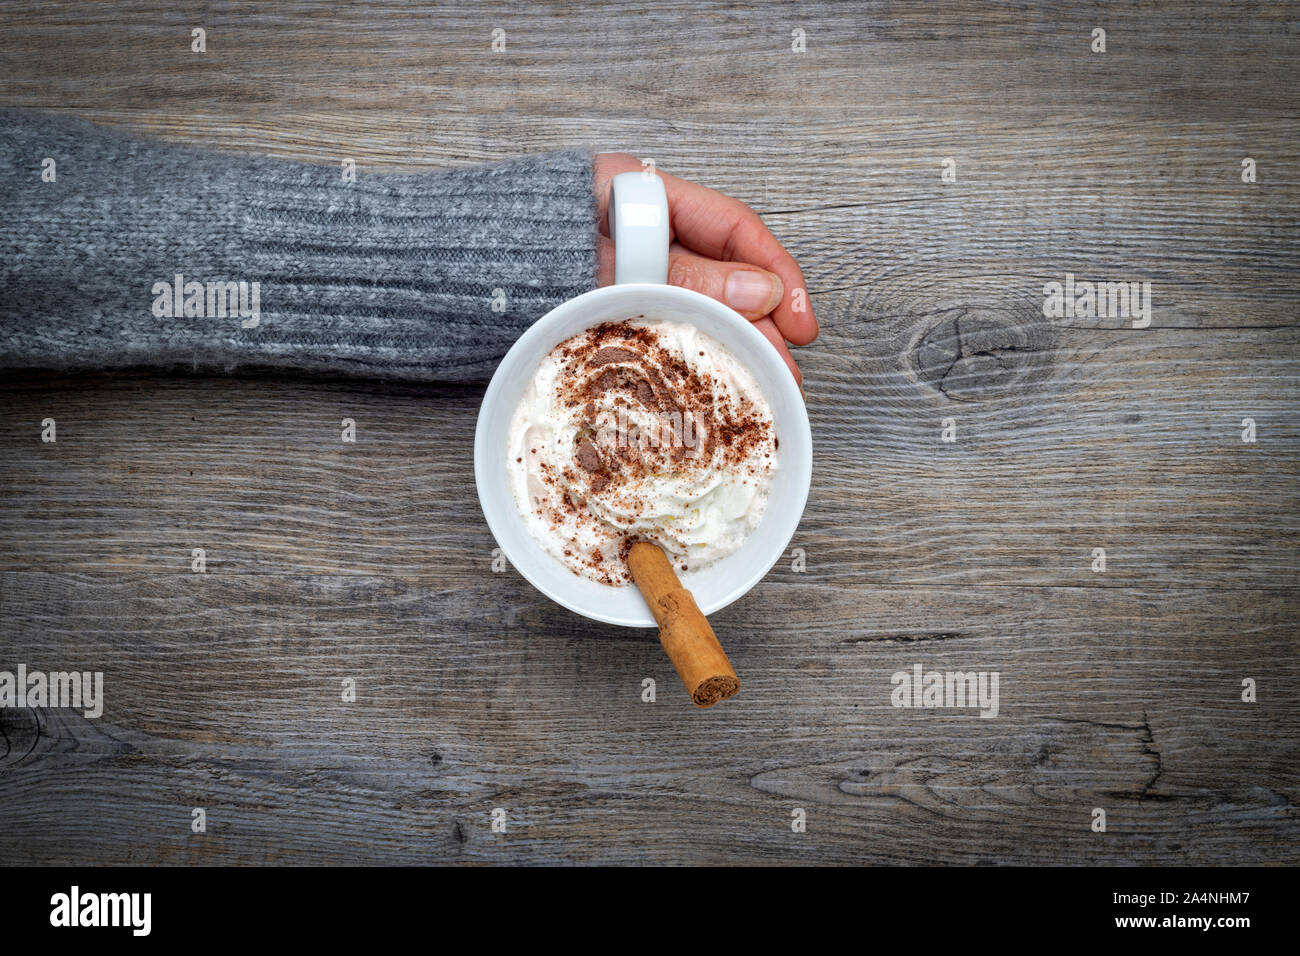 woman wearing a warm jumper holding a mug of hot chocolate, from above. Stock Photo